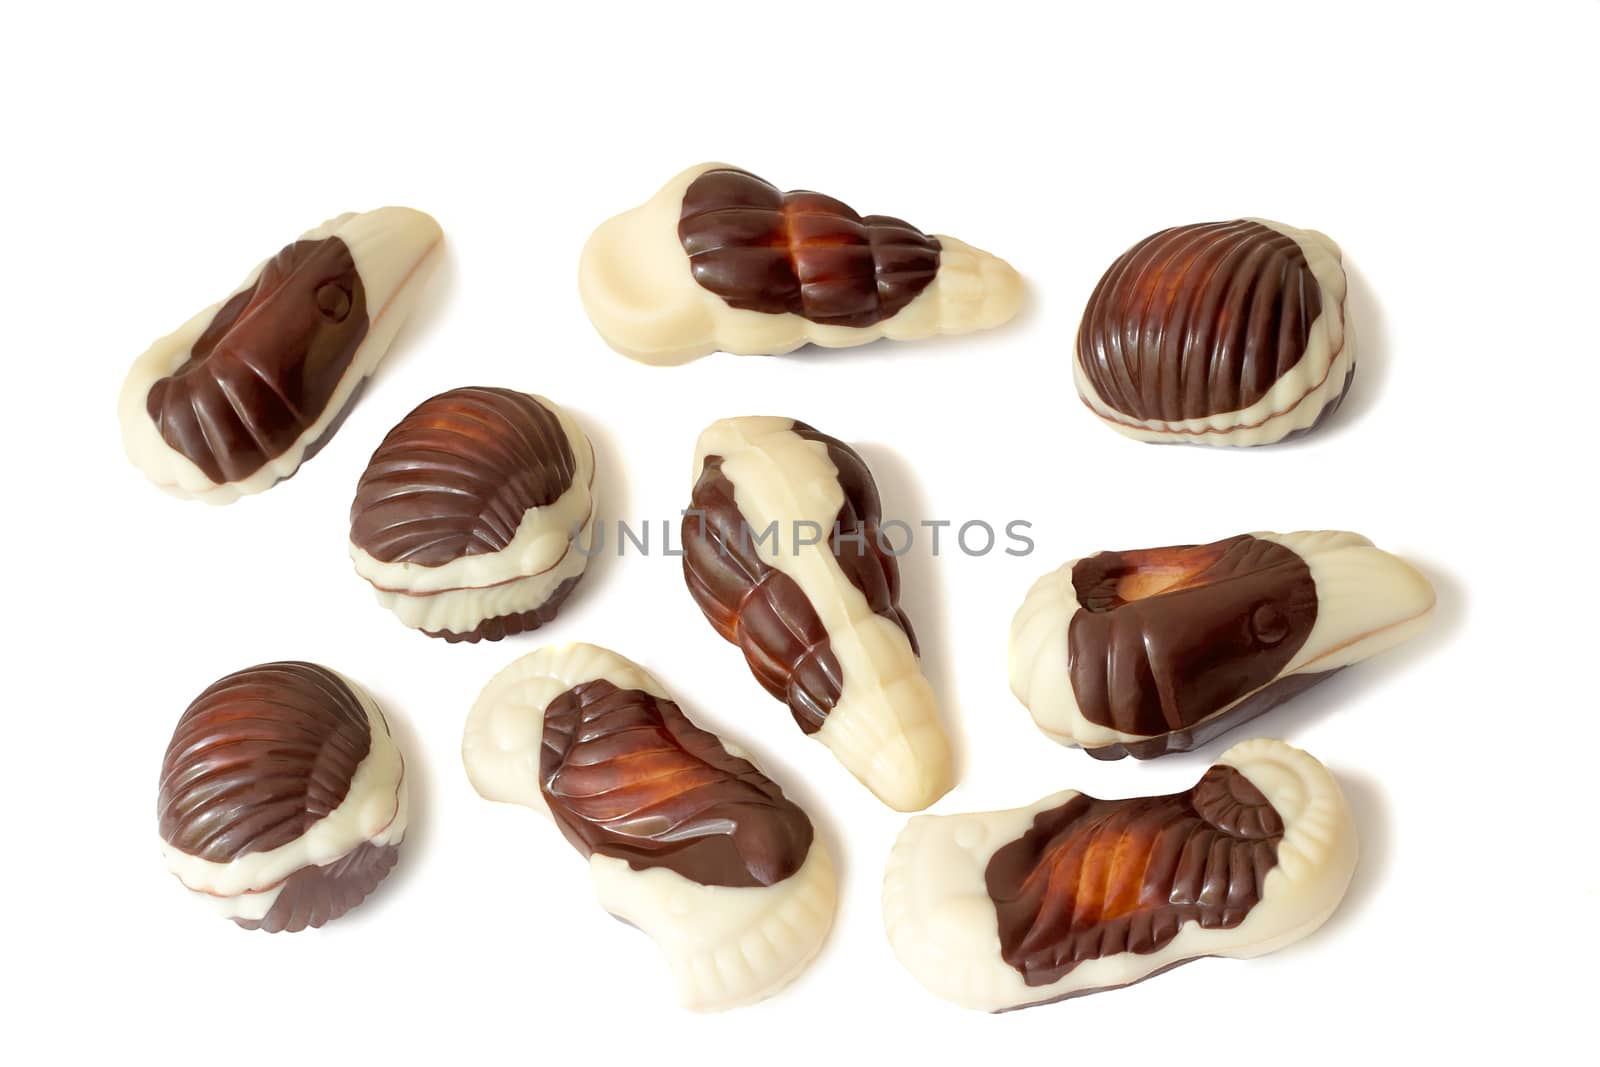 Tasty and appetizing chocolates of a various form. Are presented on a white background.